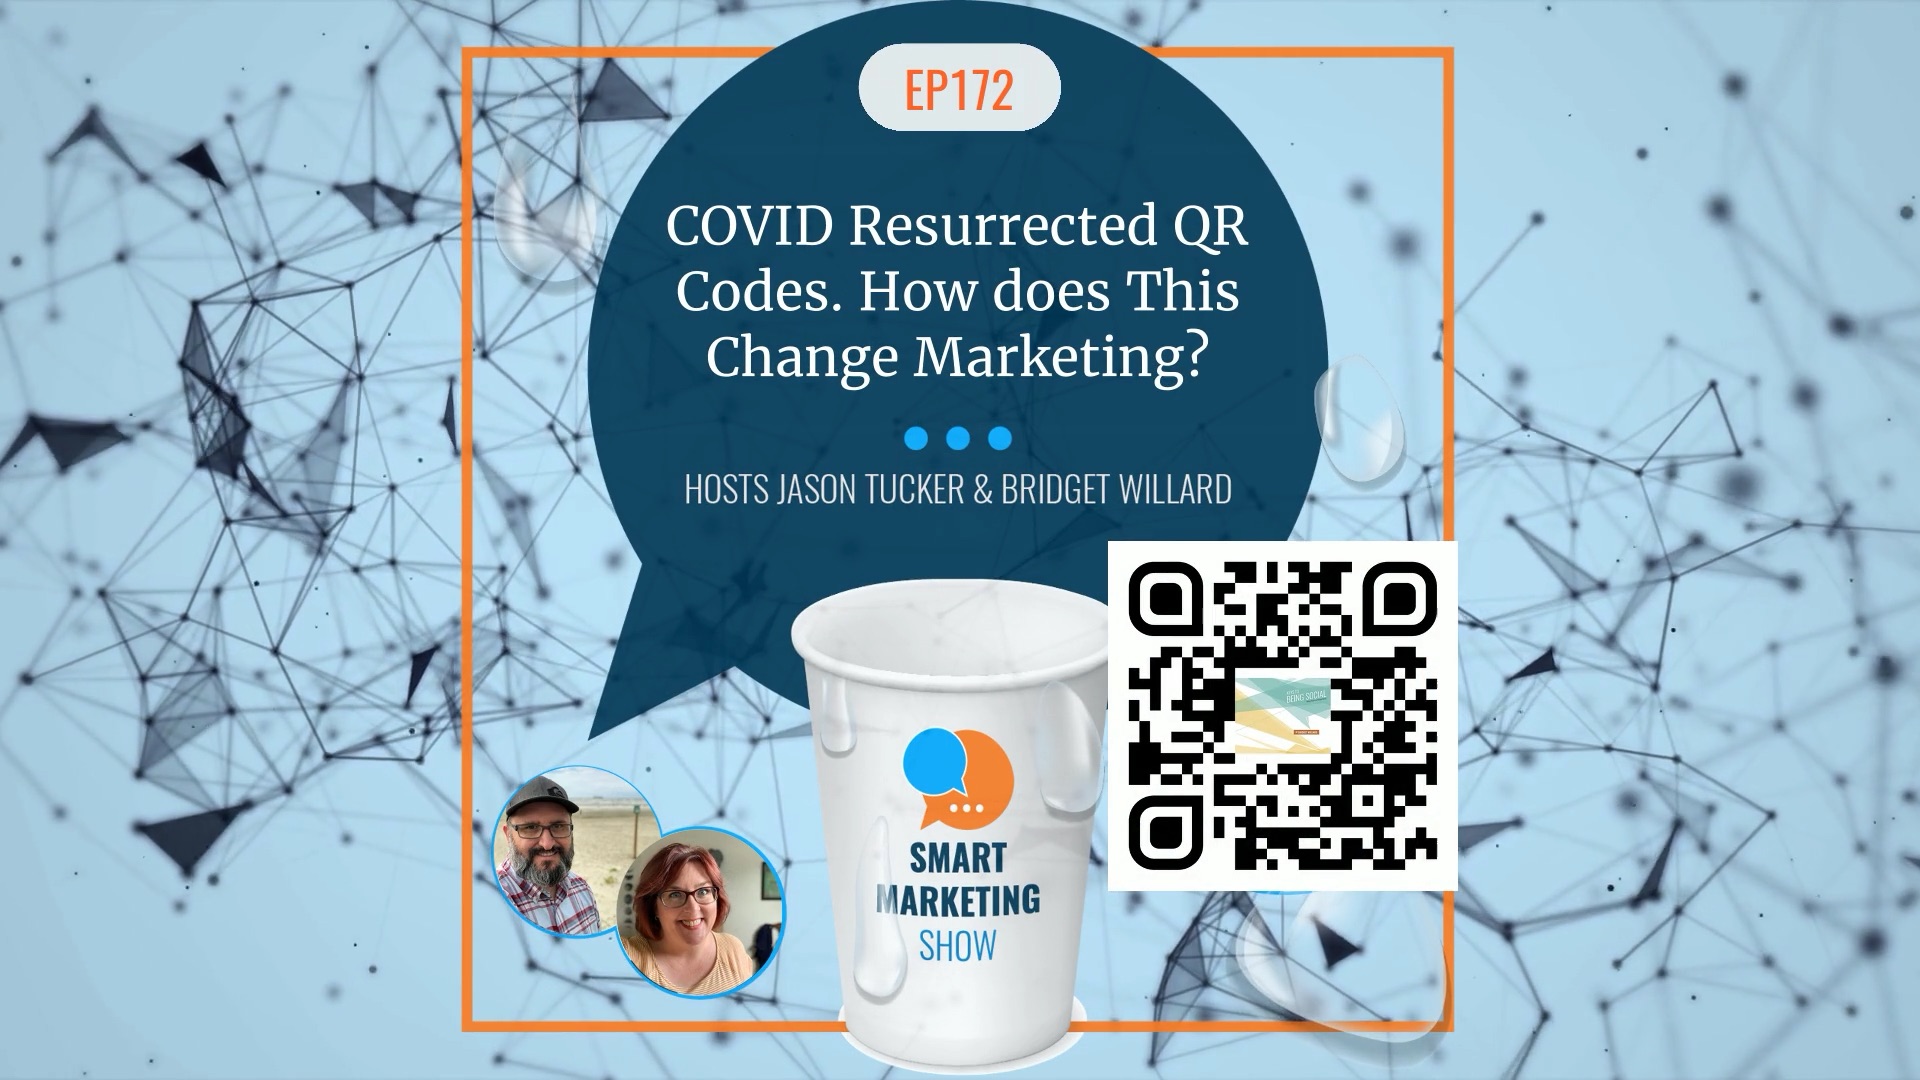 EP172 COVID Resurrected QR Codes How does This Change Marketing